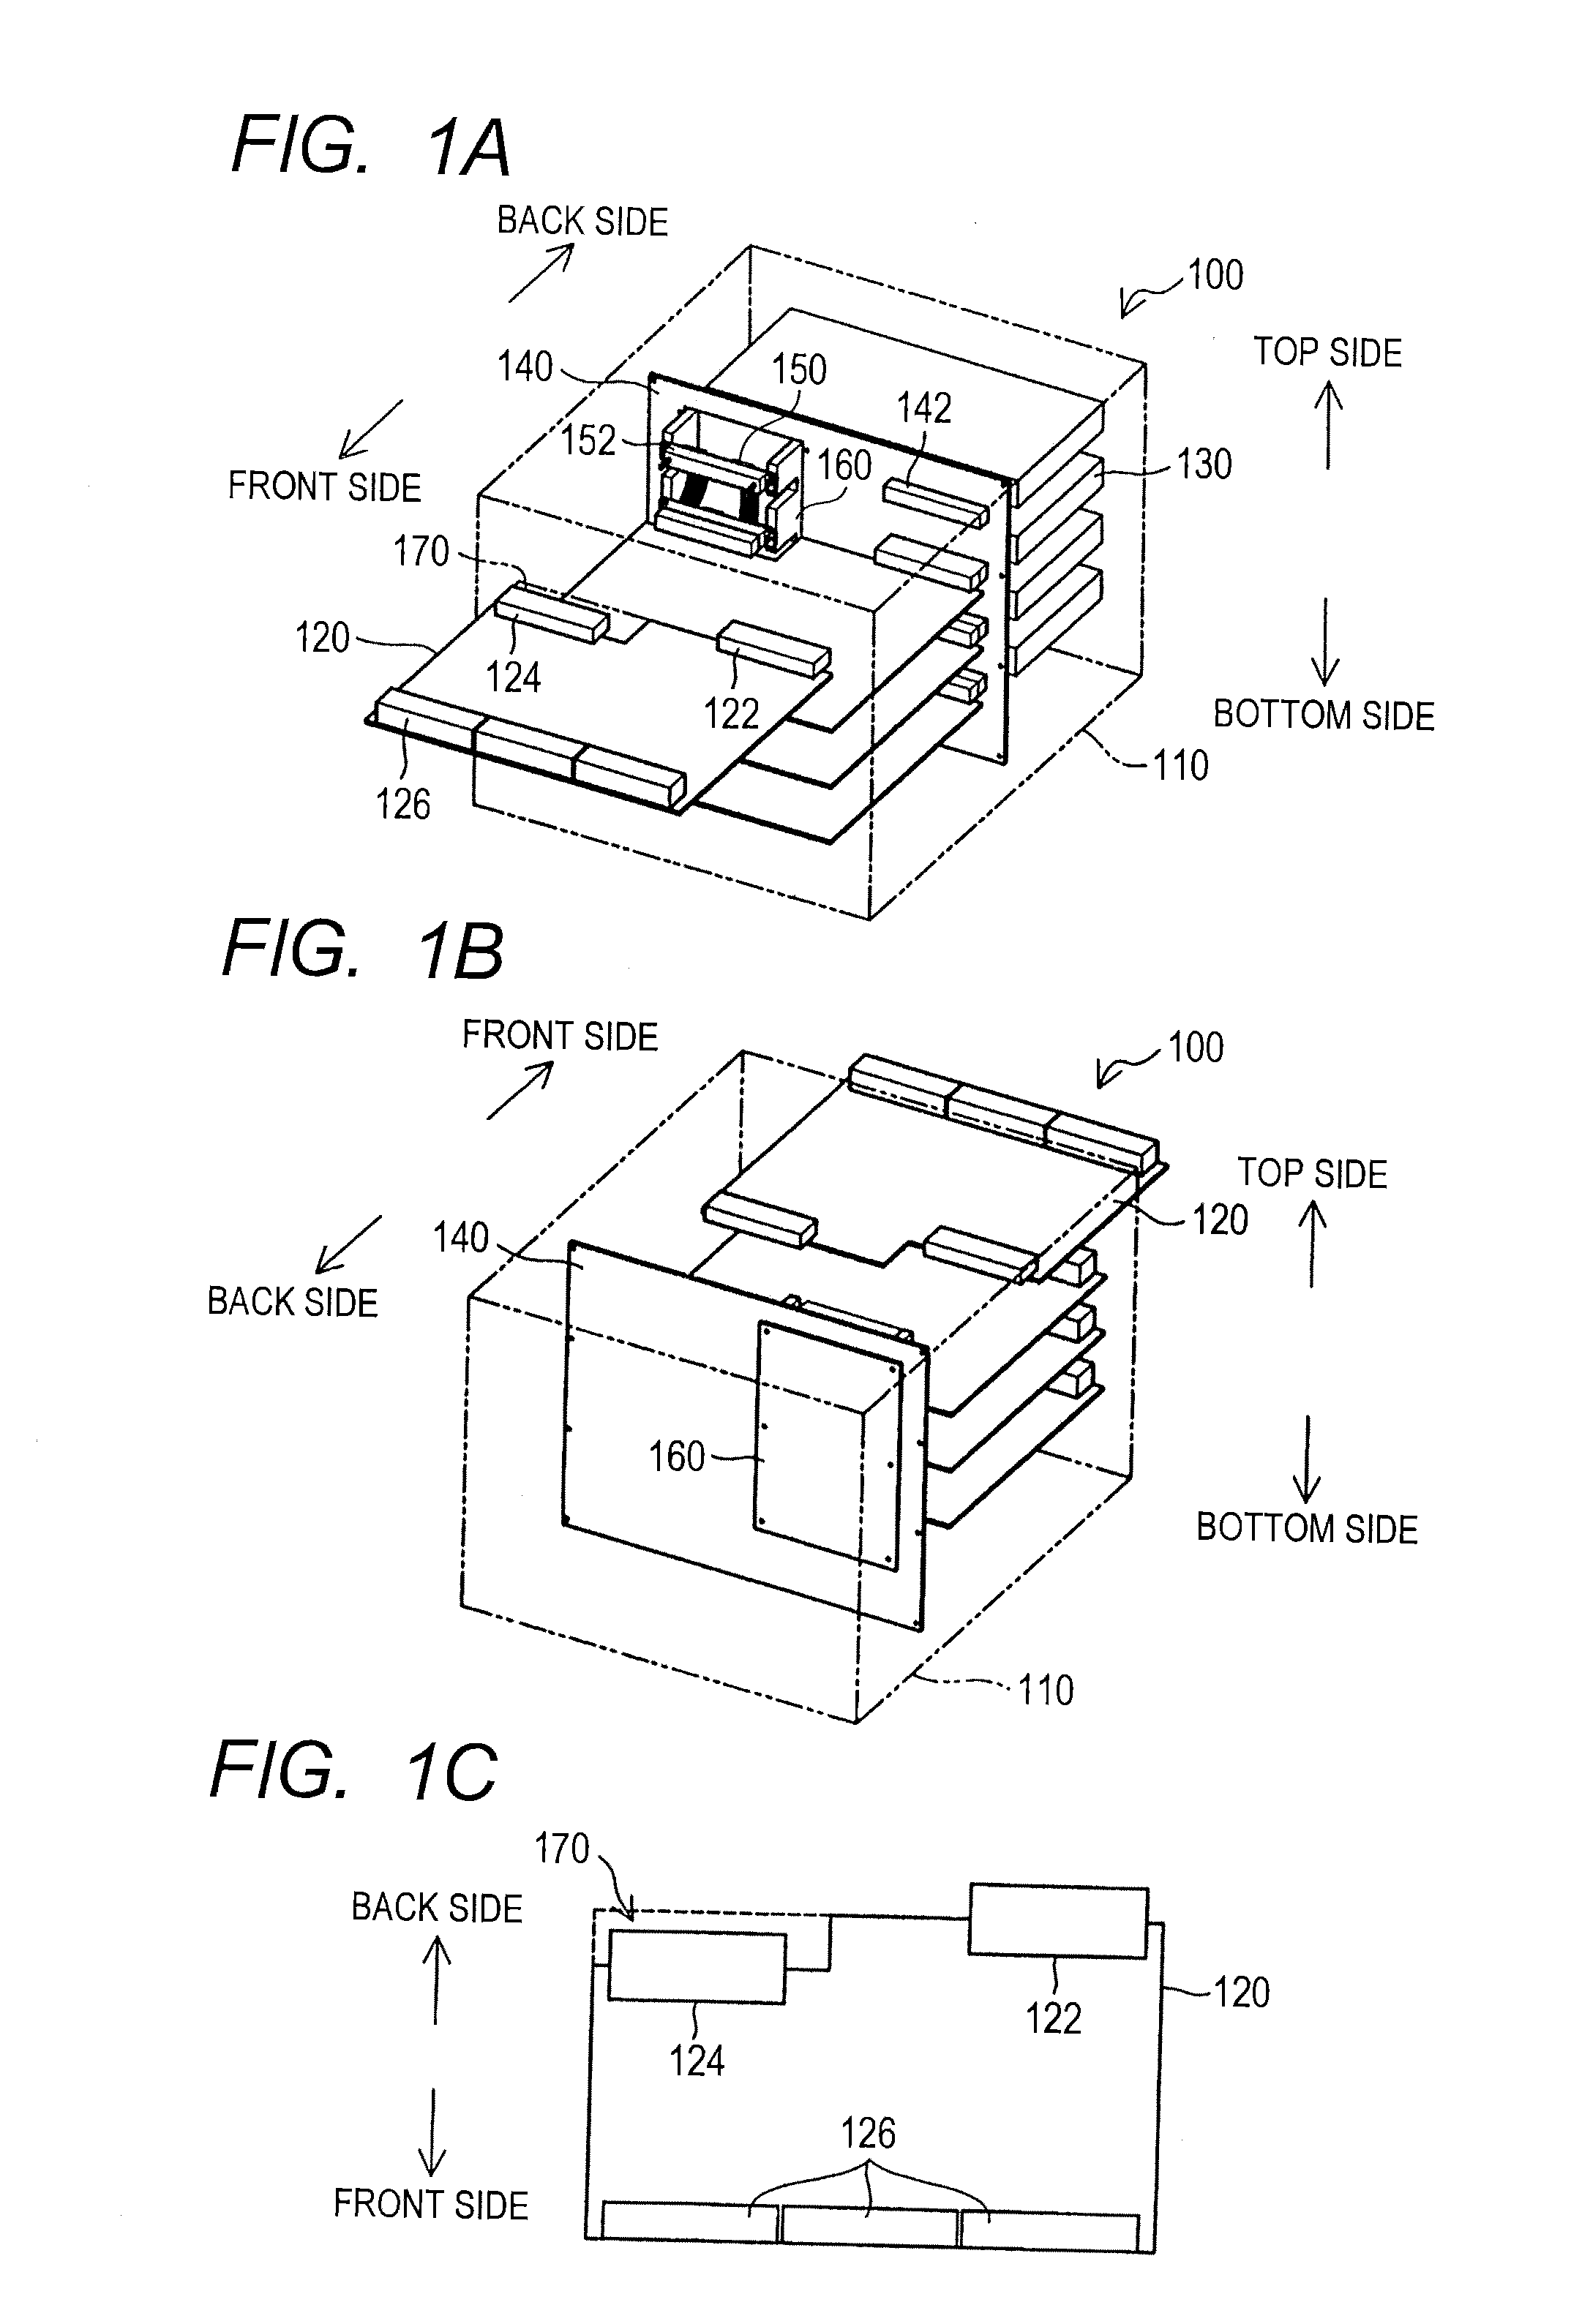 Electronic device